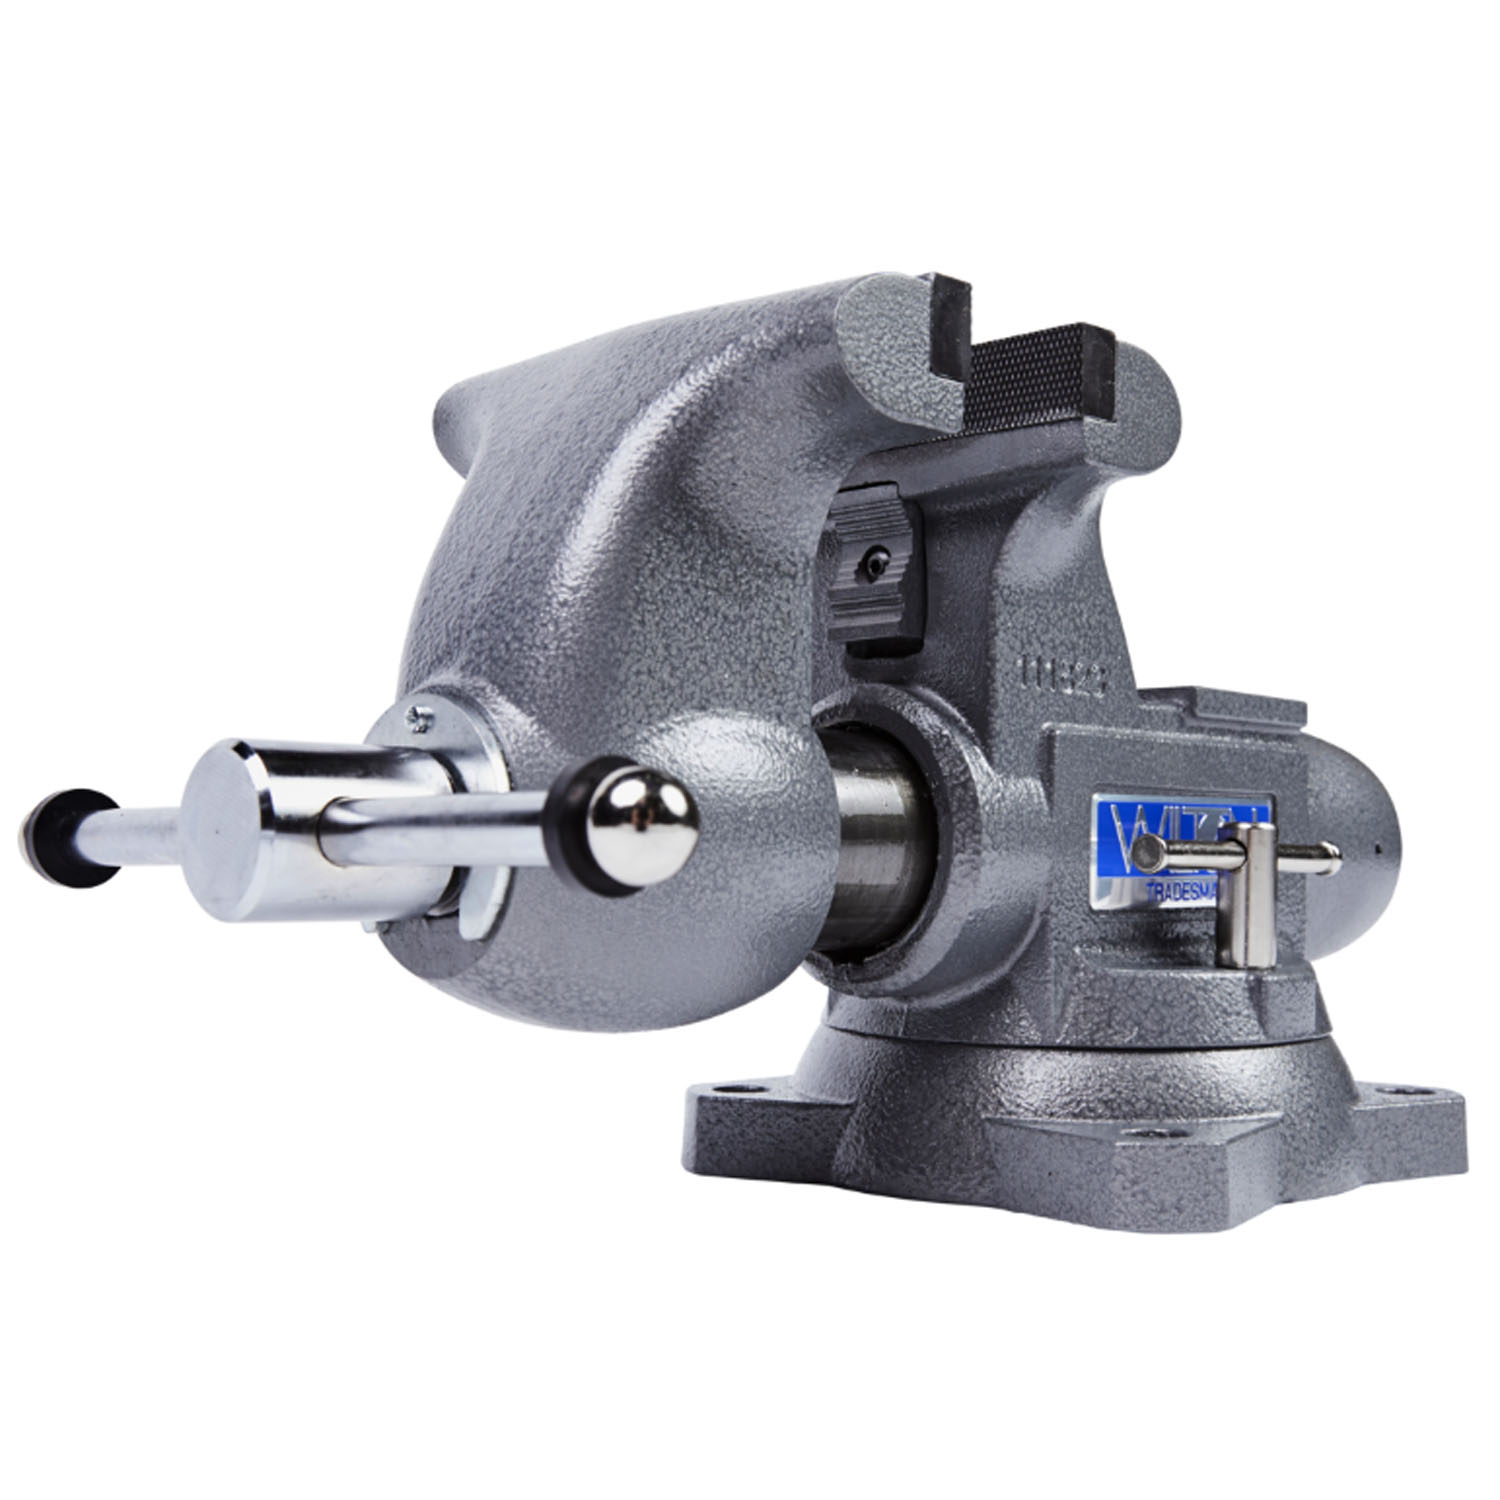 TRADESMAN 1765 BENCH VISE 6-1/2 IN. JAW WIDTH 6 IN. JAW OPENING 4 IN. THROAT DEPTH